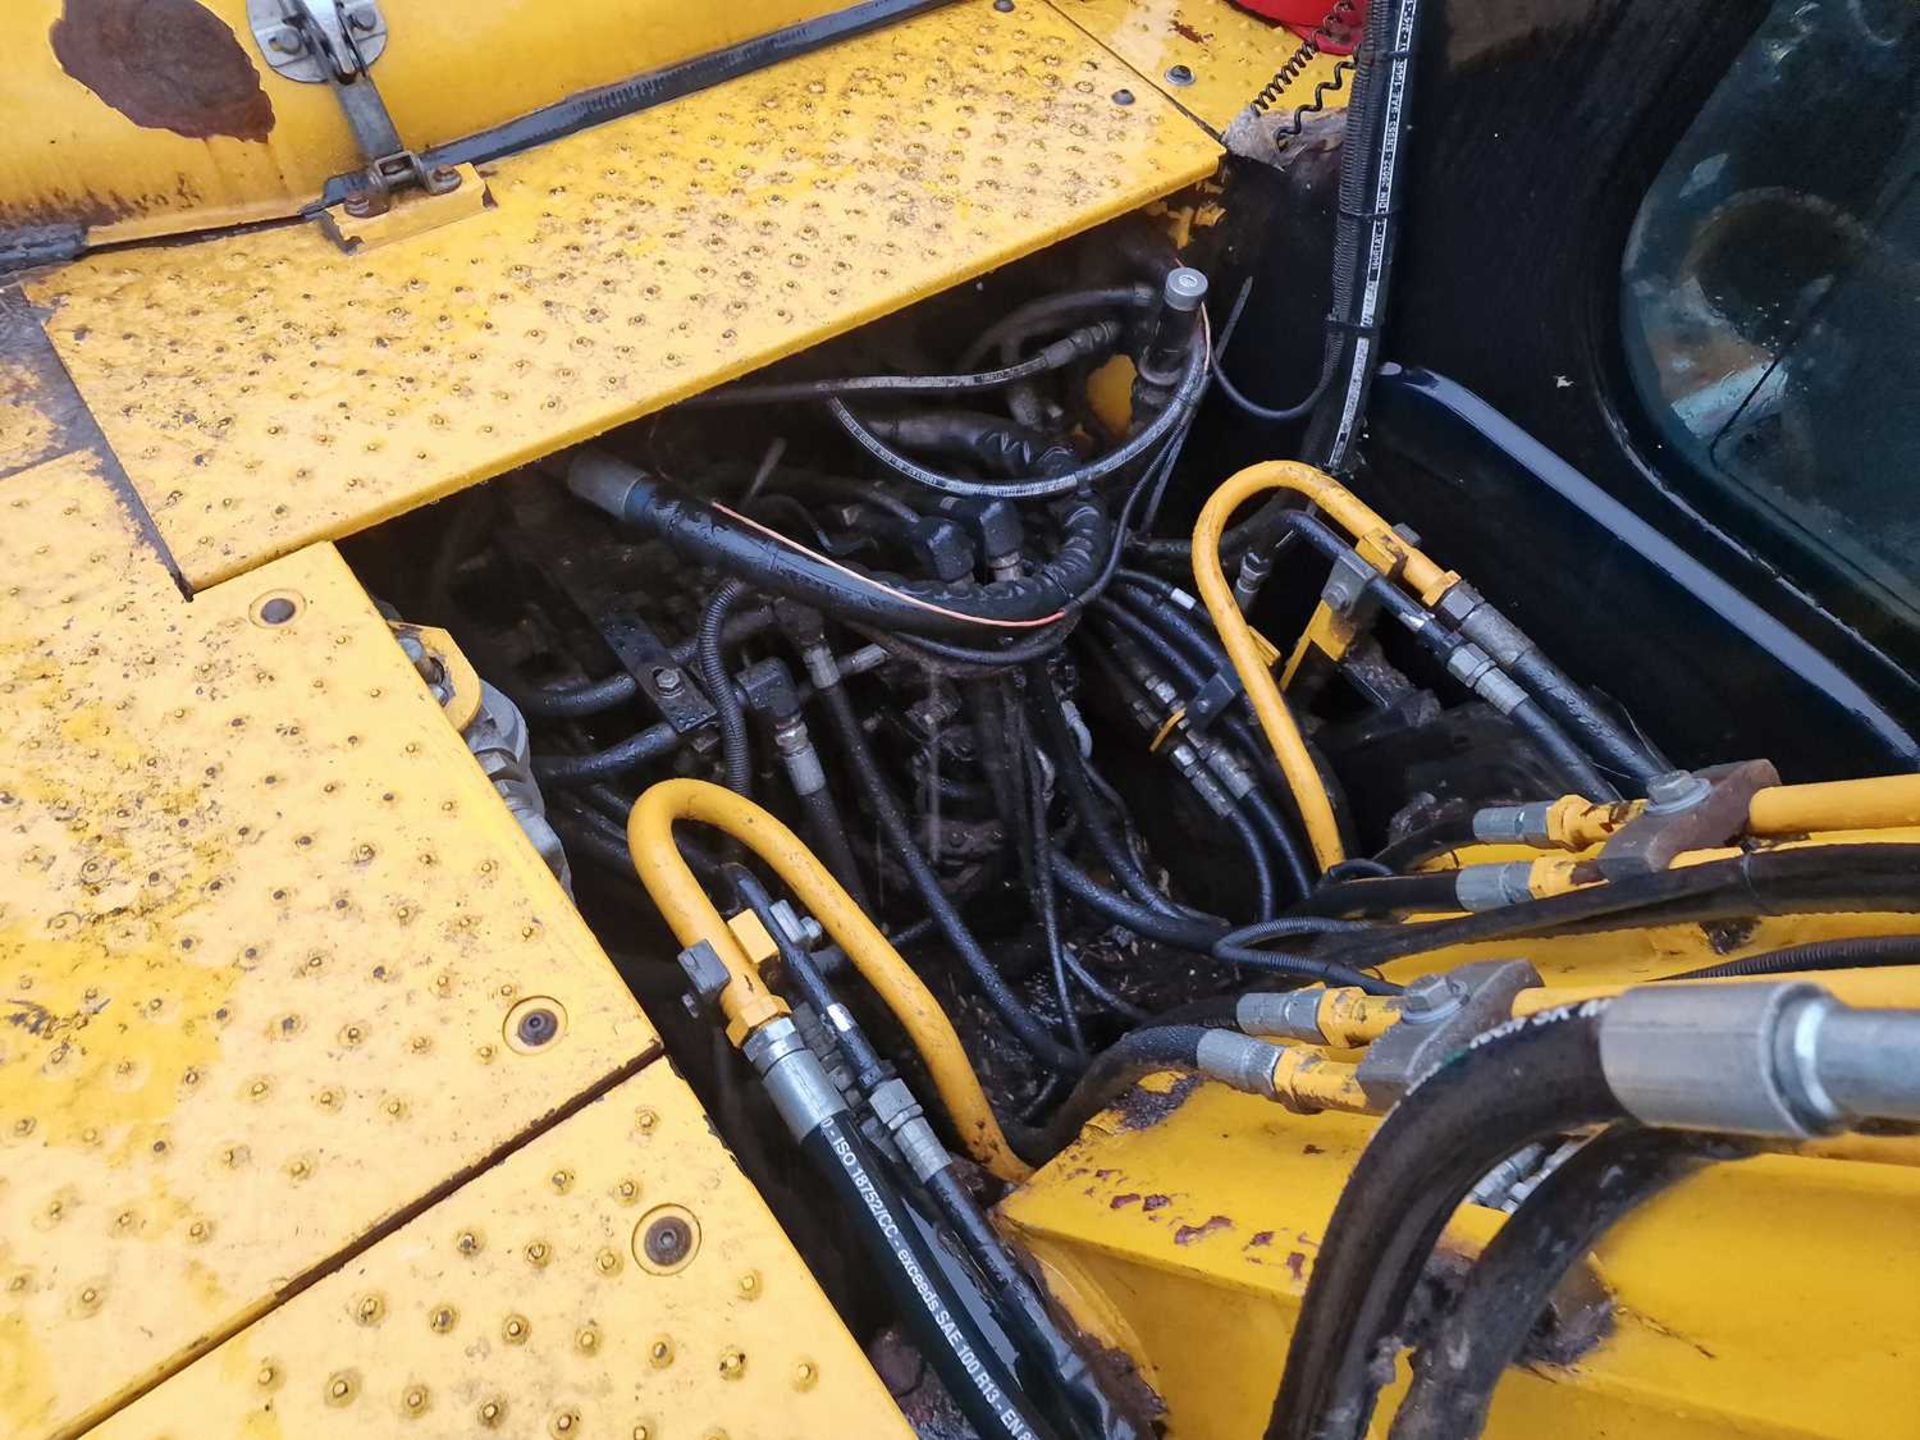 2017 JCB JS160LC, 700mm Steel Tracks, CV, Piped, Reverse Camera, A/C (EPA Compliant) - Image 25 of 37